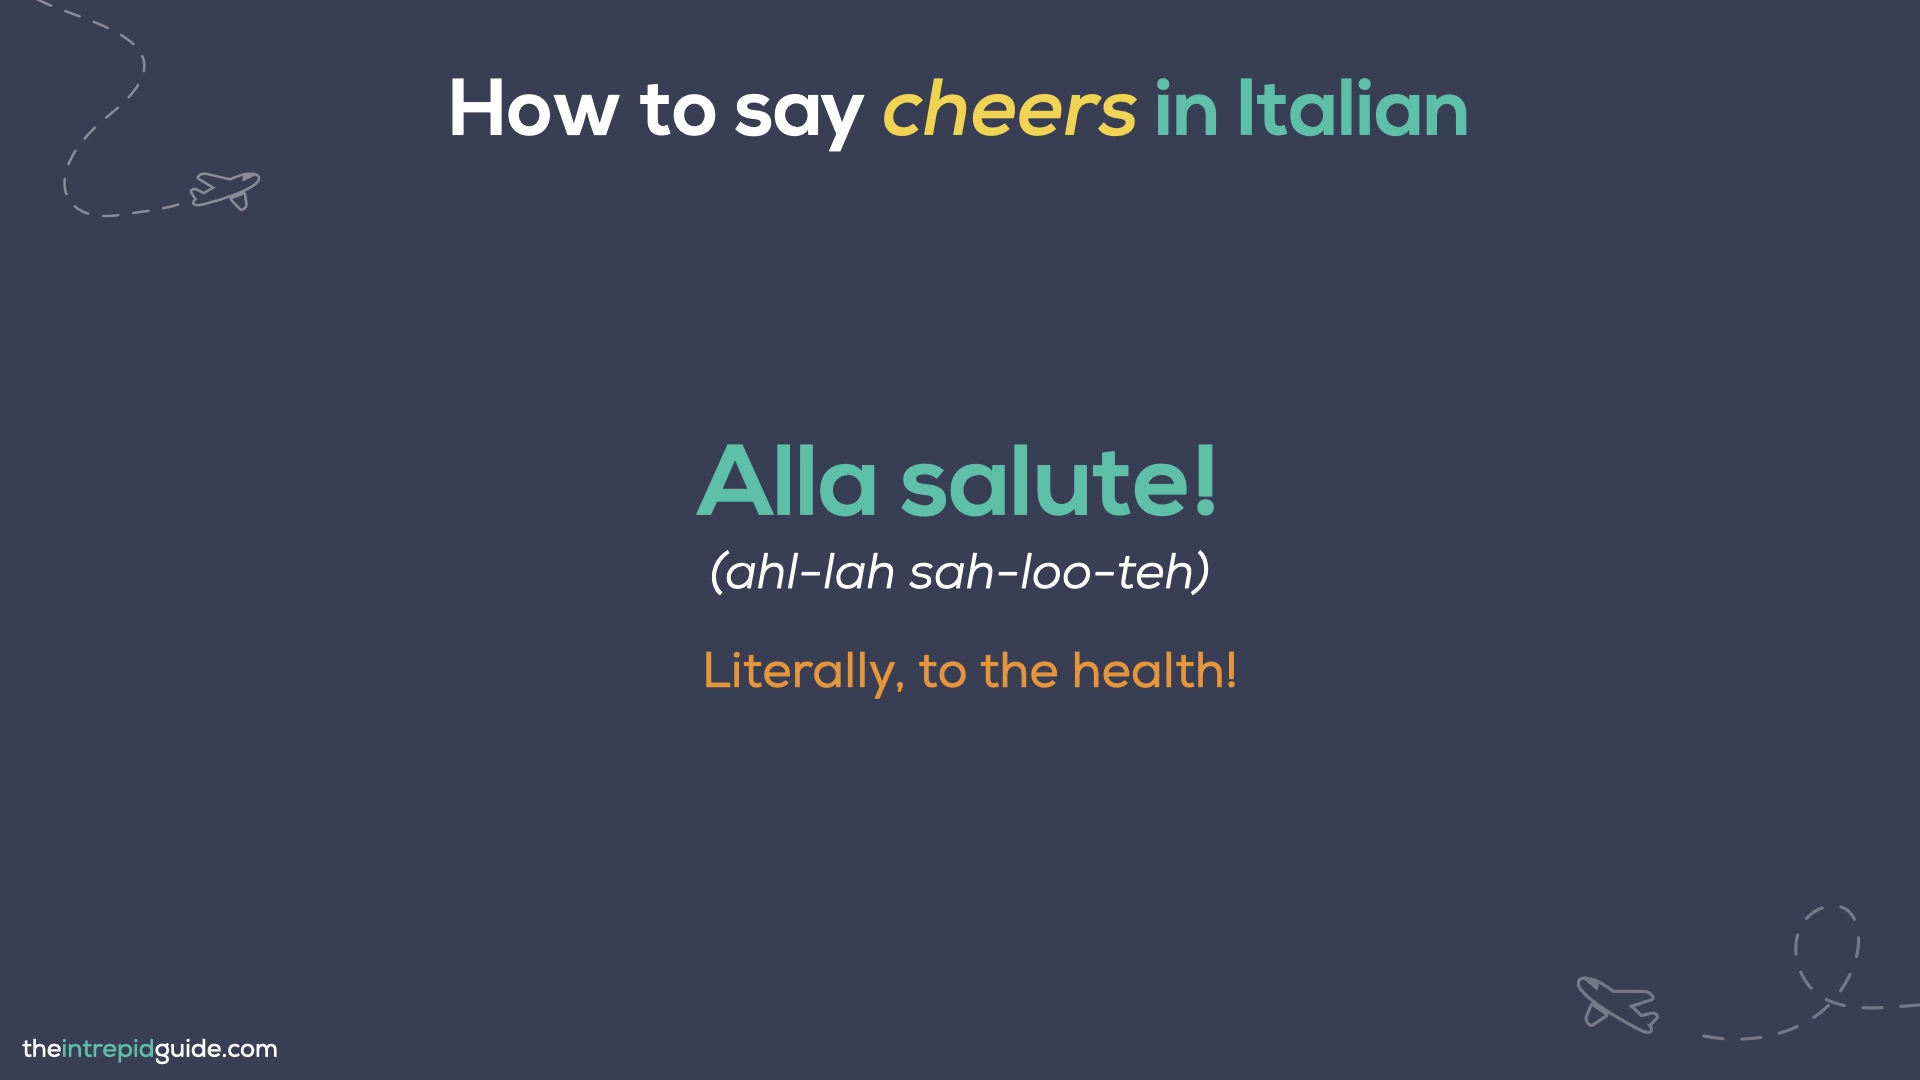 How to say cheers in Italian - Alla Salute